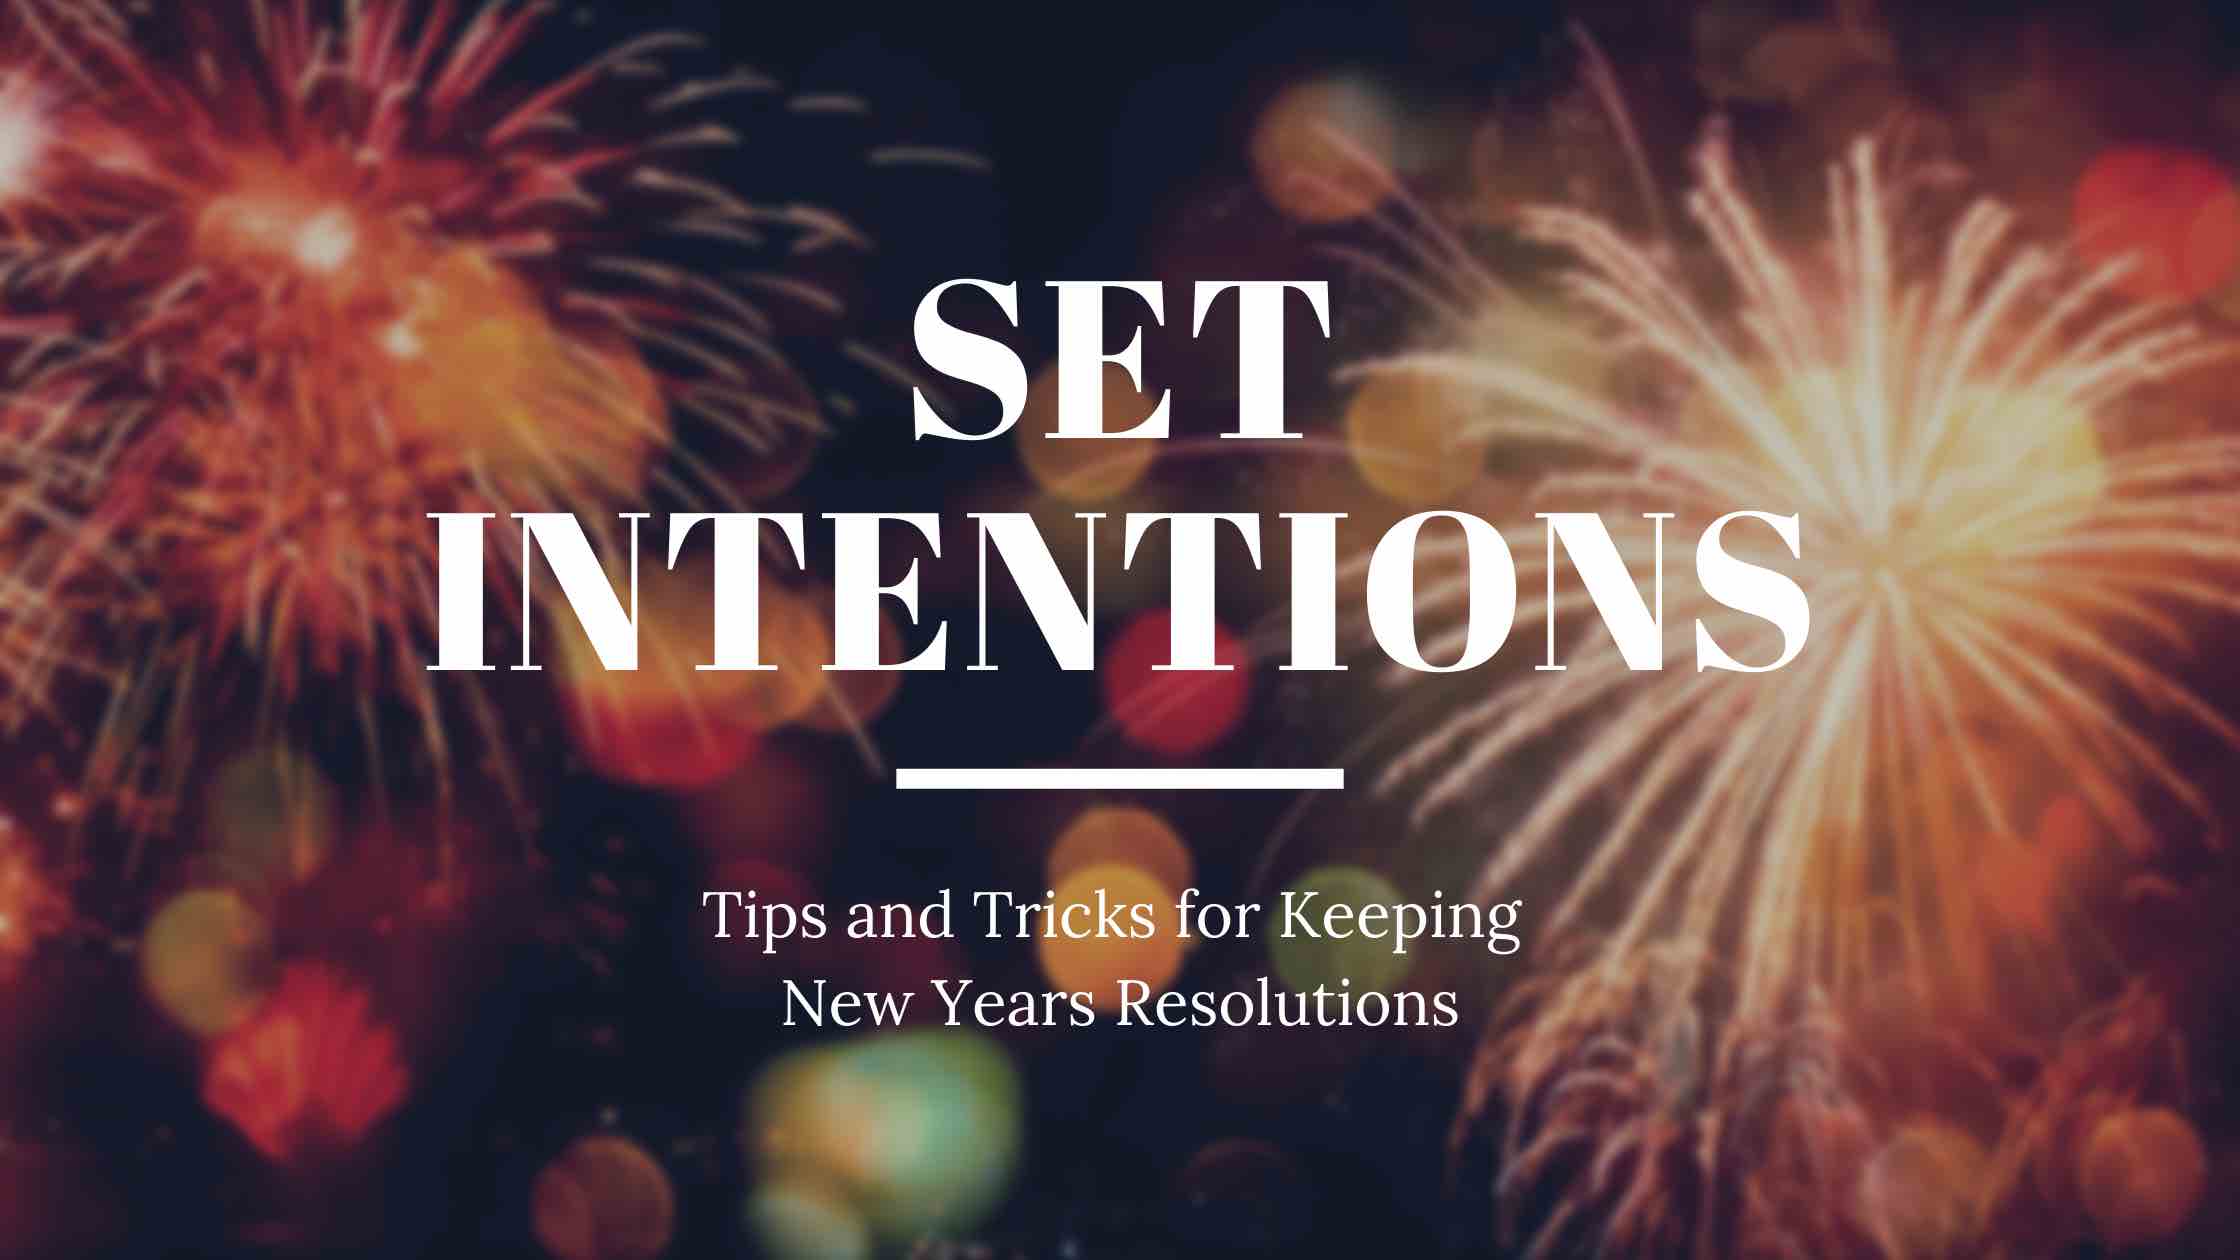 Fireworks go off in the background as a metaphor for how to keep your resolutions, one idea being setting intentions.